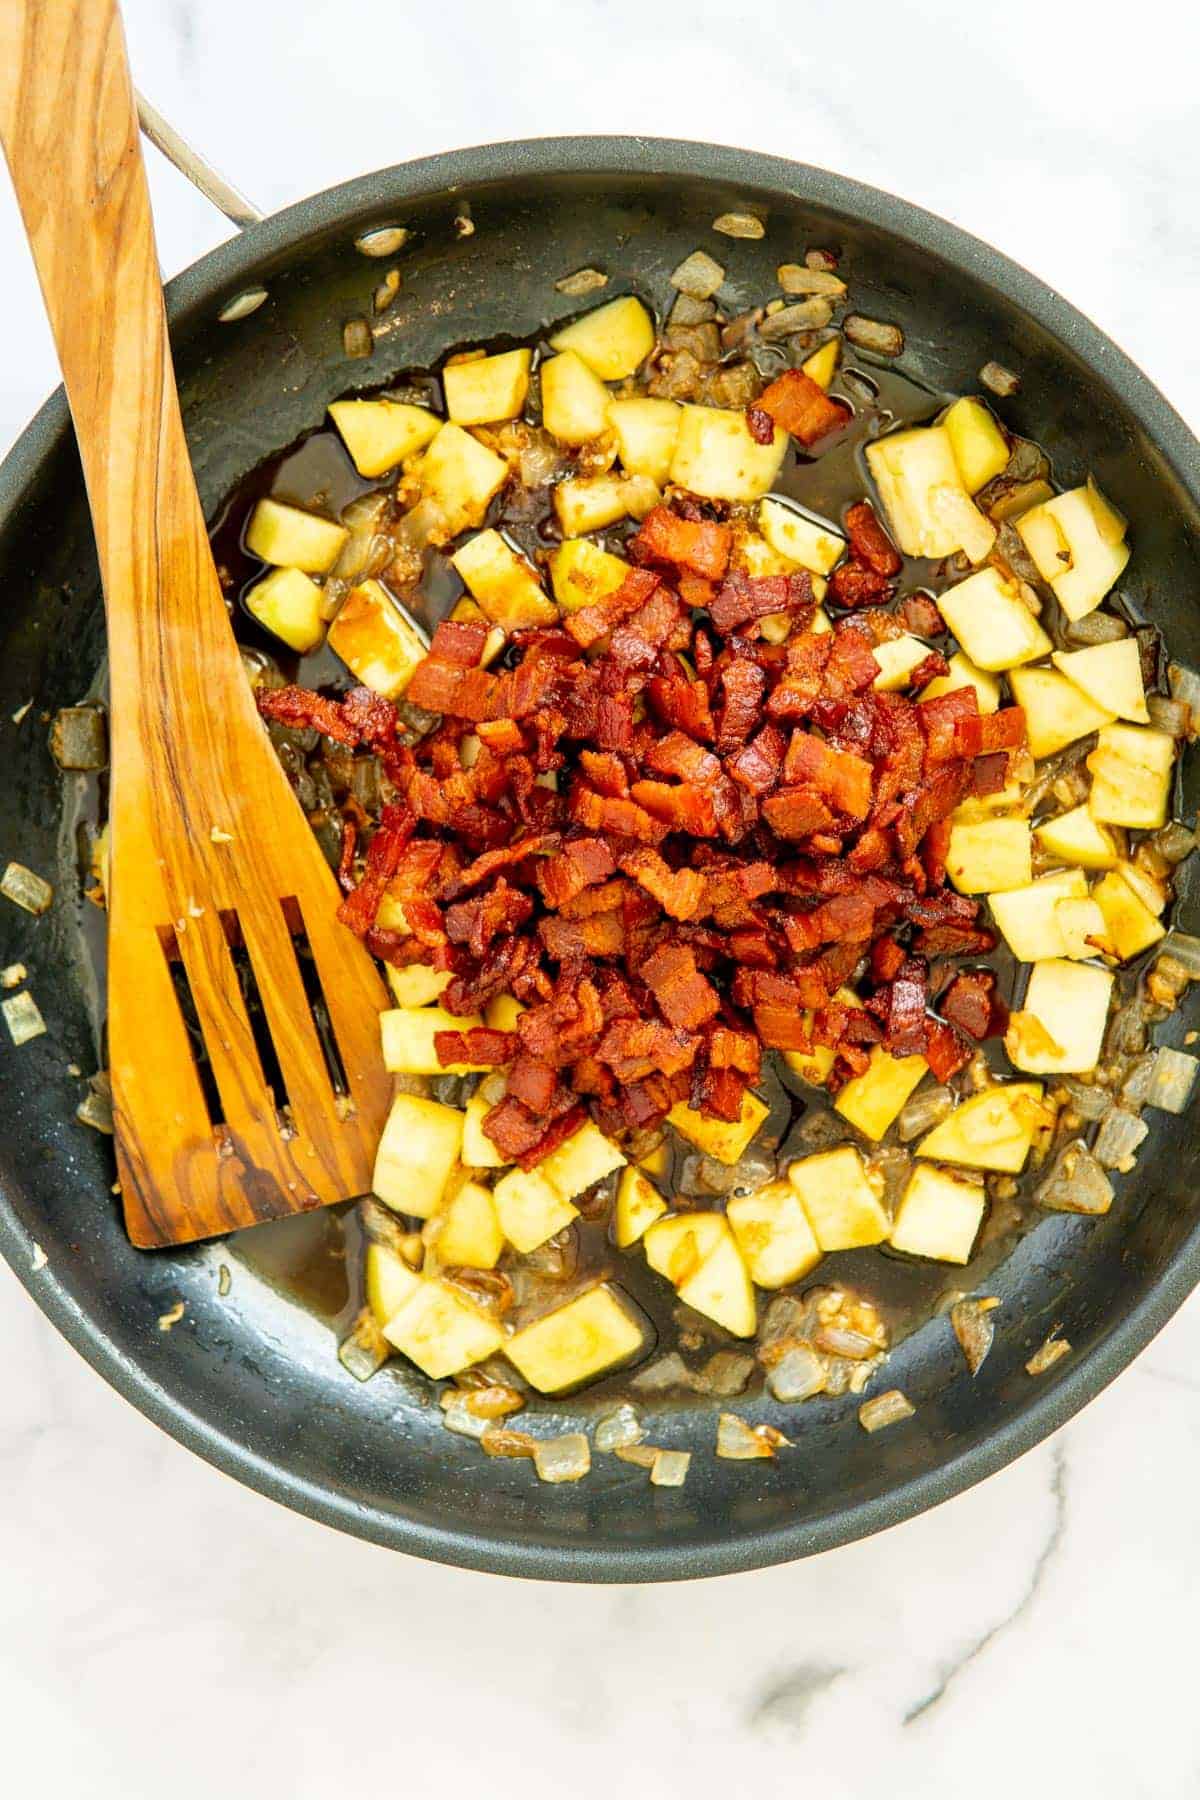 Apples and onions with bacon and remaining ingredients for jam in a frypan.